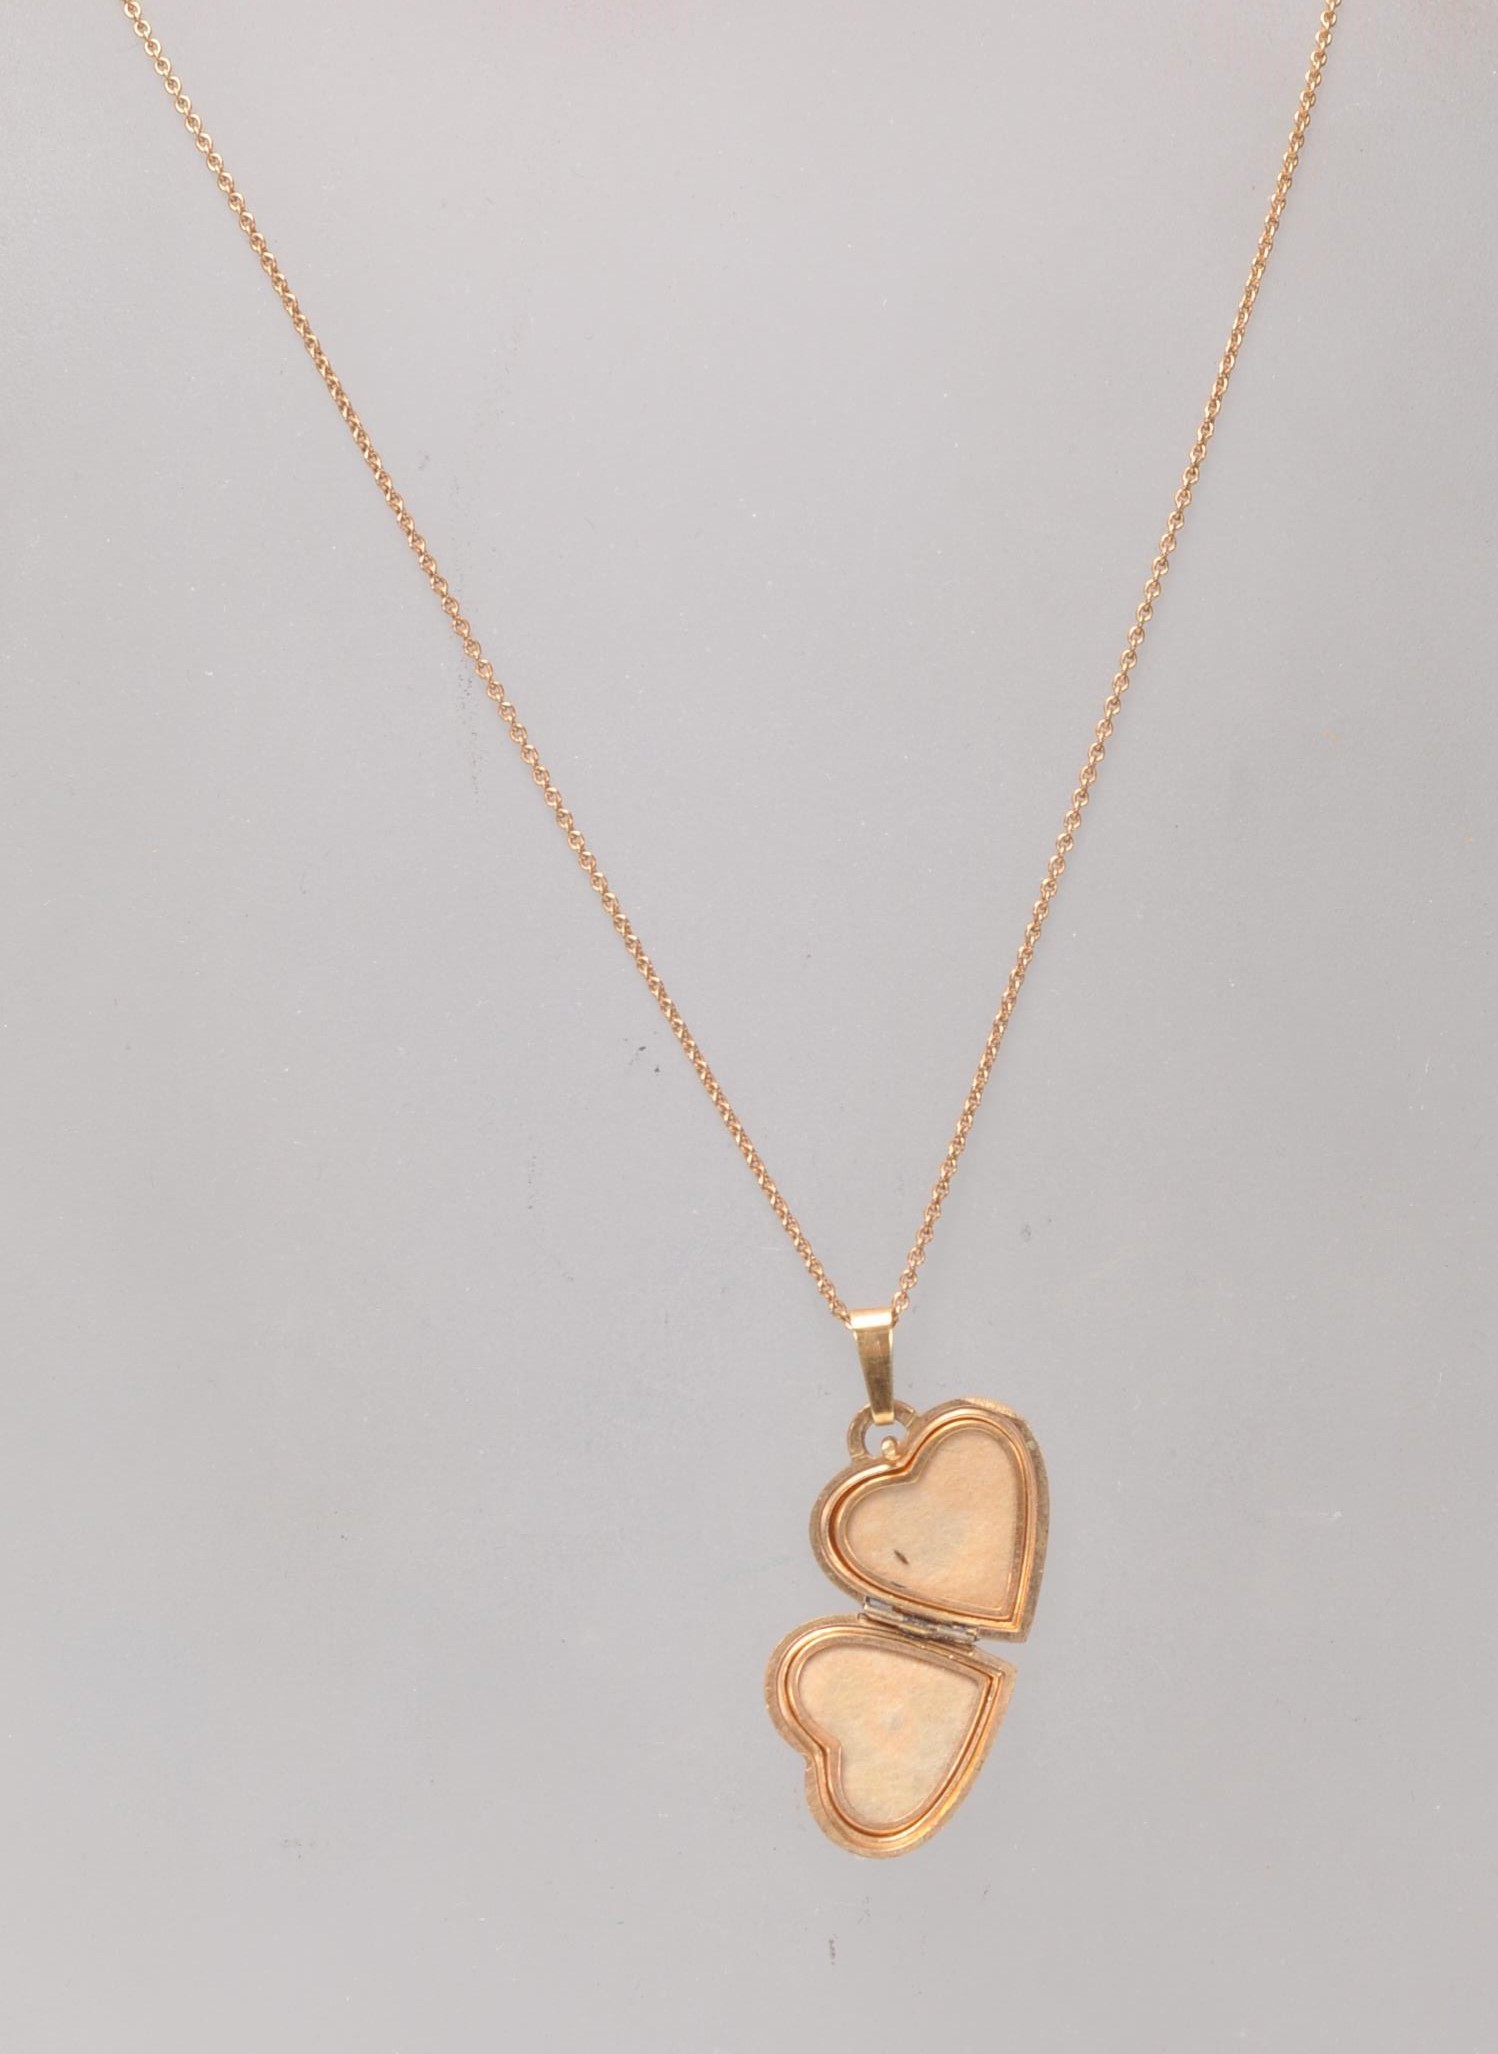 A stamped 14ct gold heart shaped pendant set with a green stone panel with a three leaf clover - Image 4 of 6